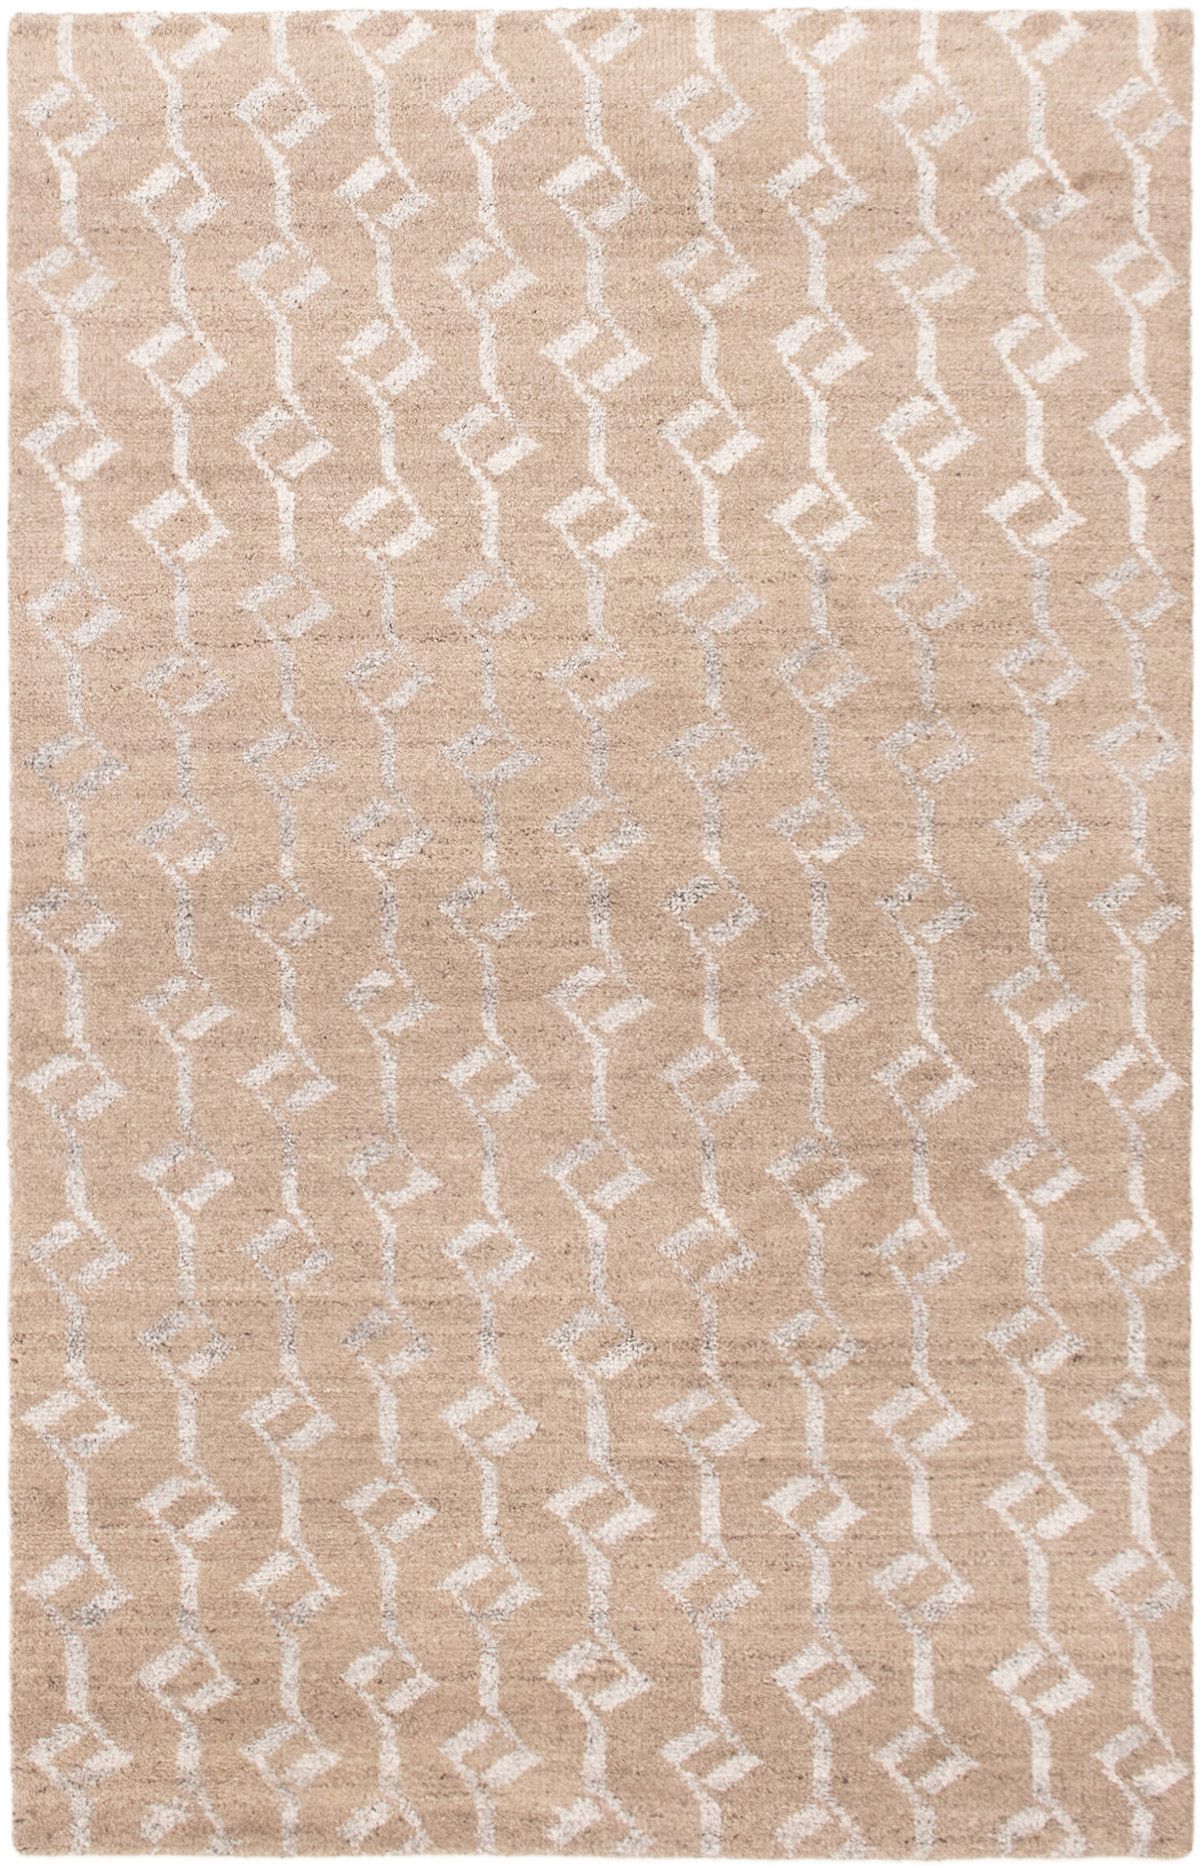 Hand-knotted Tangier Tan Wool Rug 5'0" x 7'11" Size: 5'0" x 7'11"  